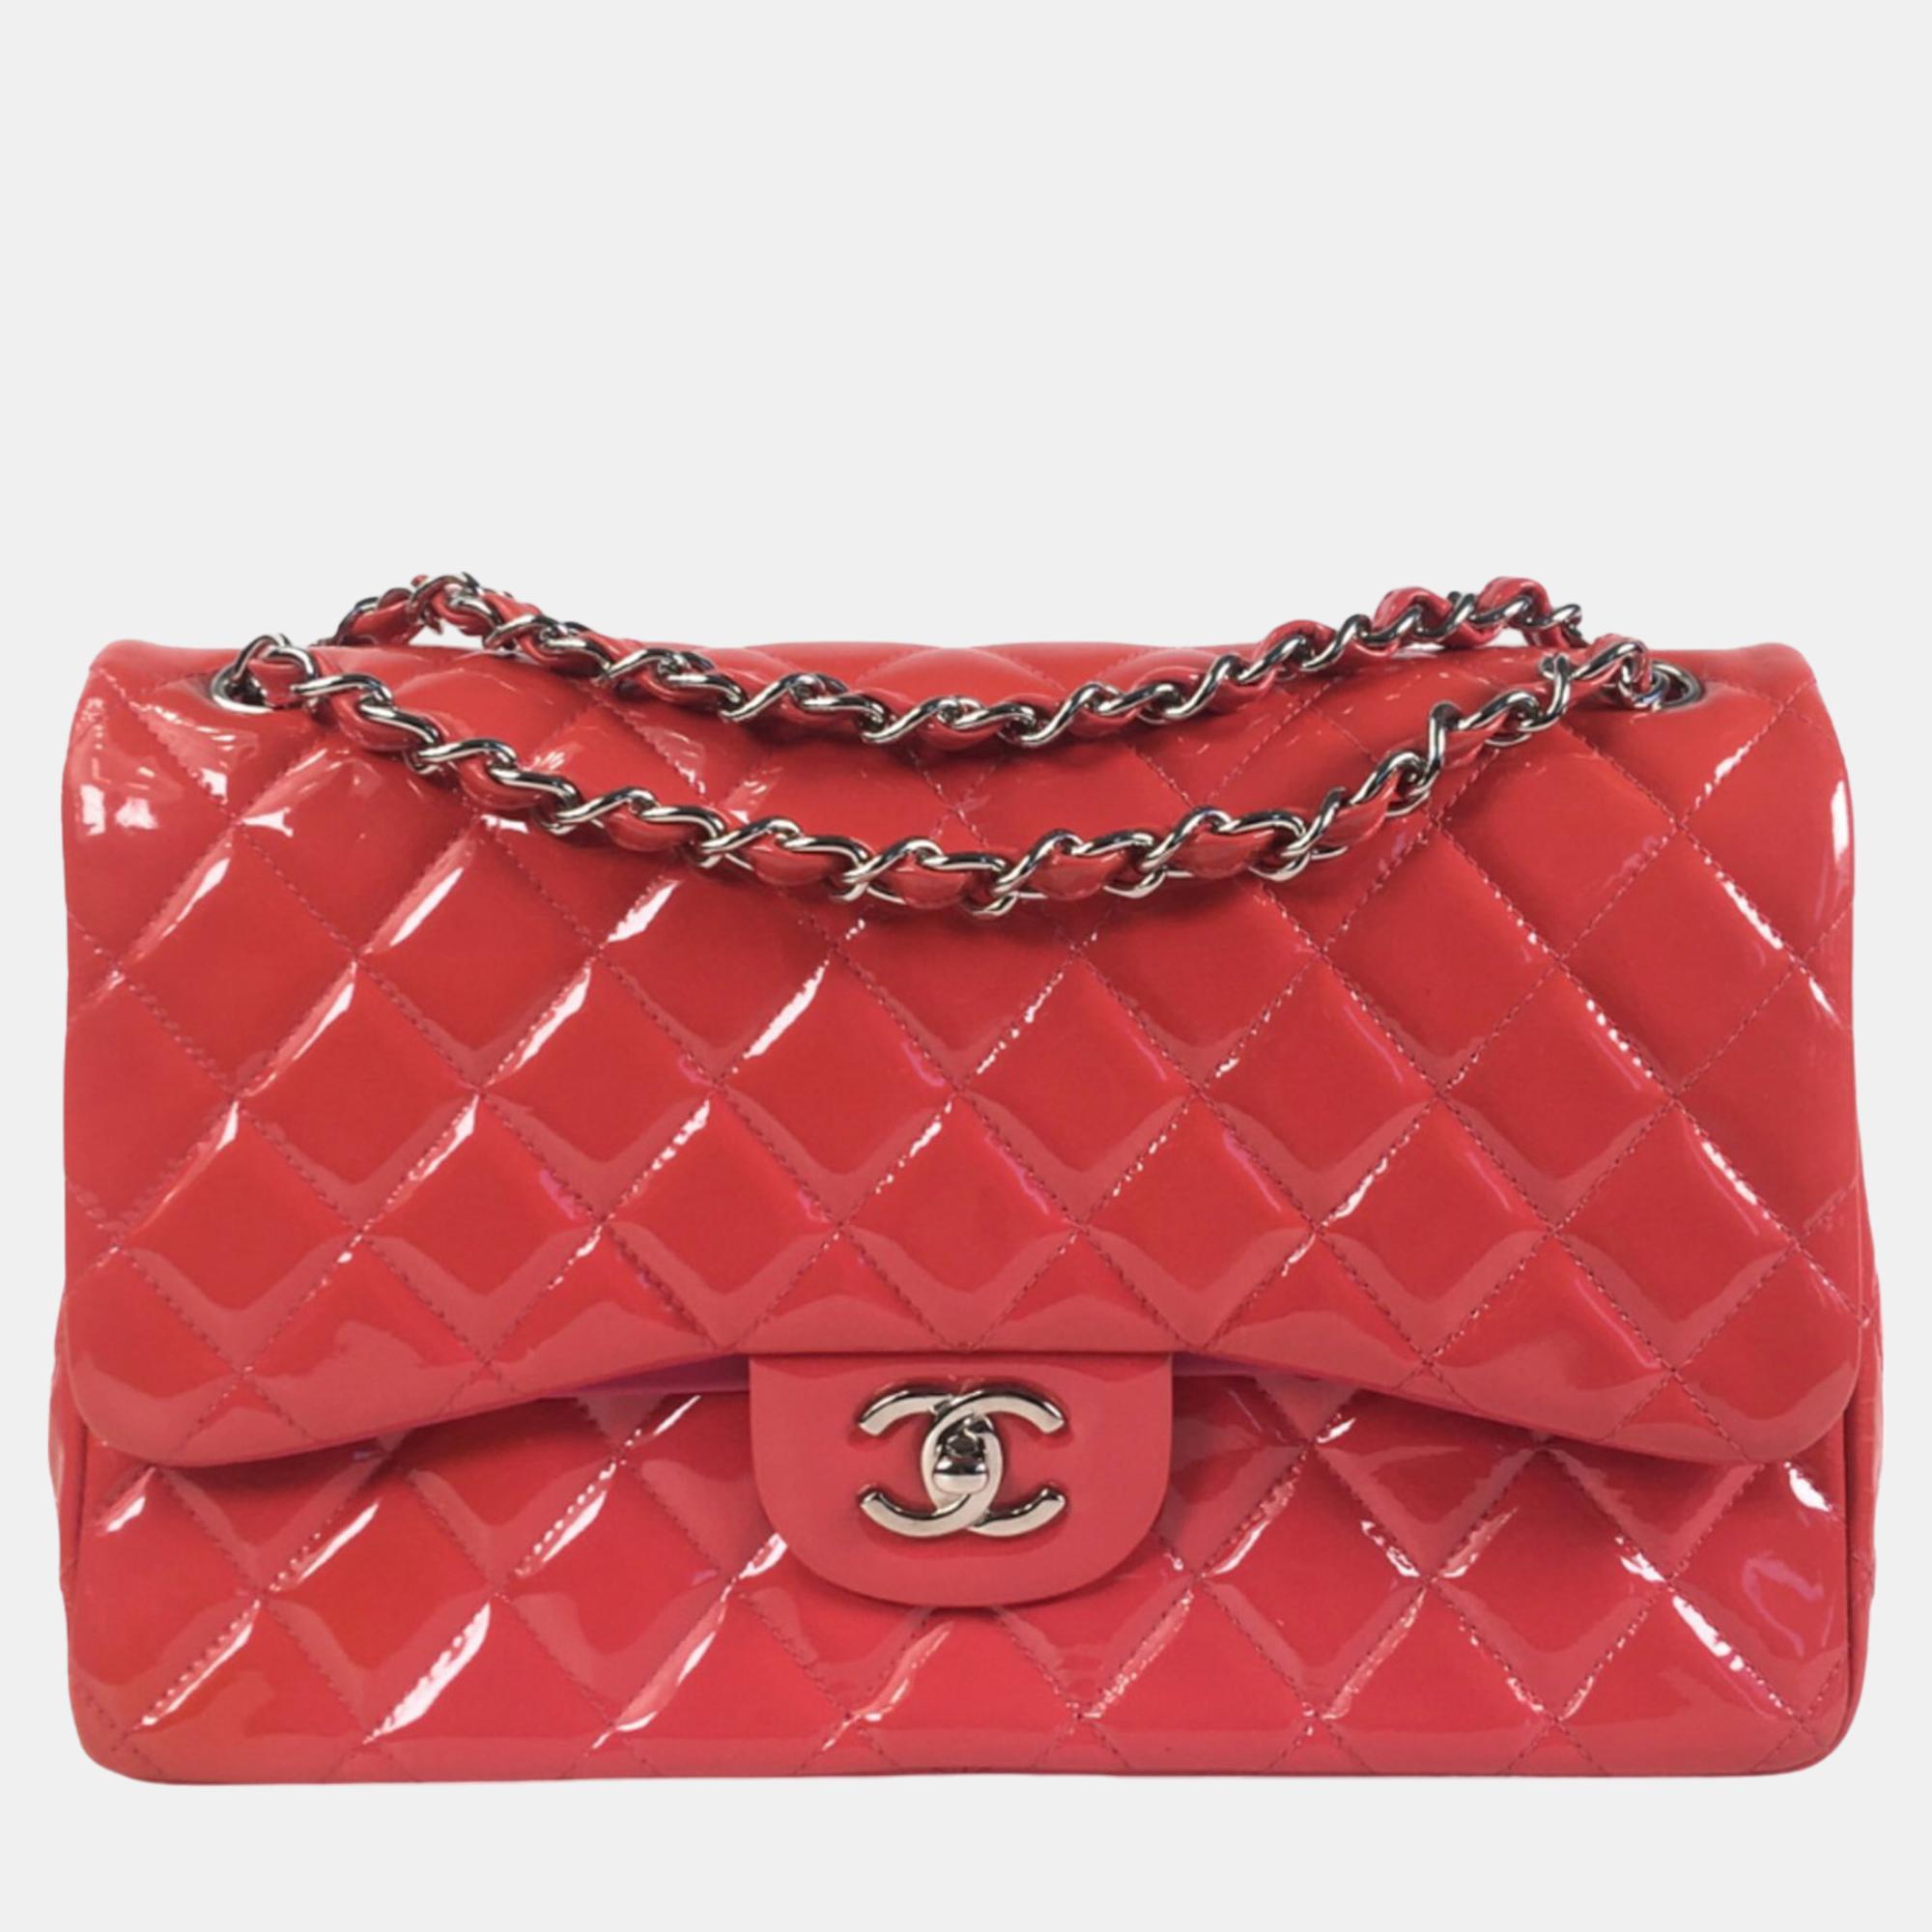 Chanel pink jumbo classic patent double flap